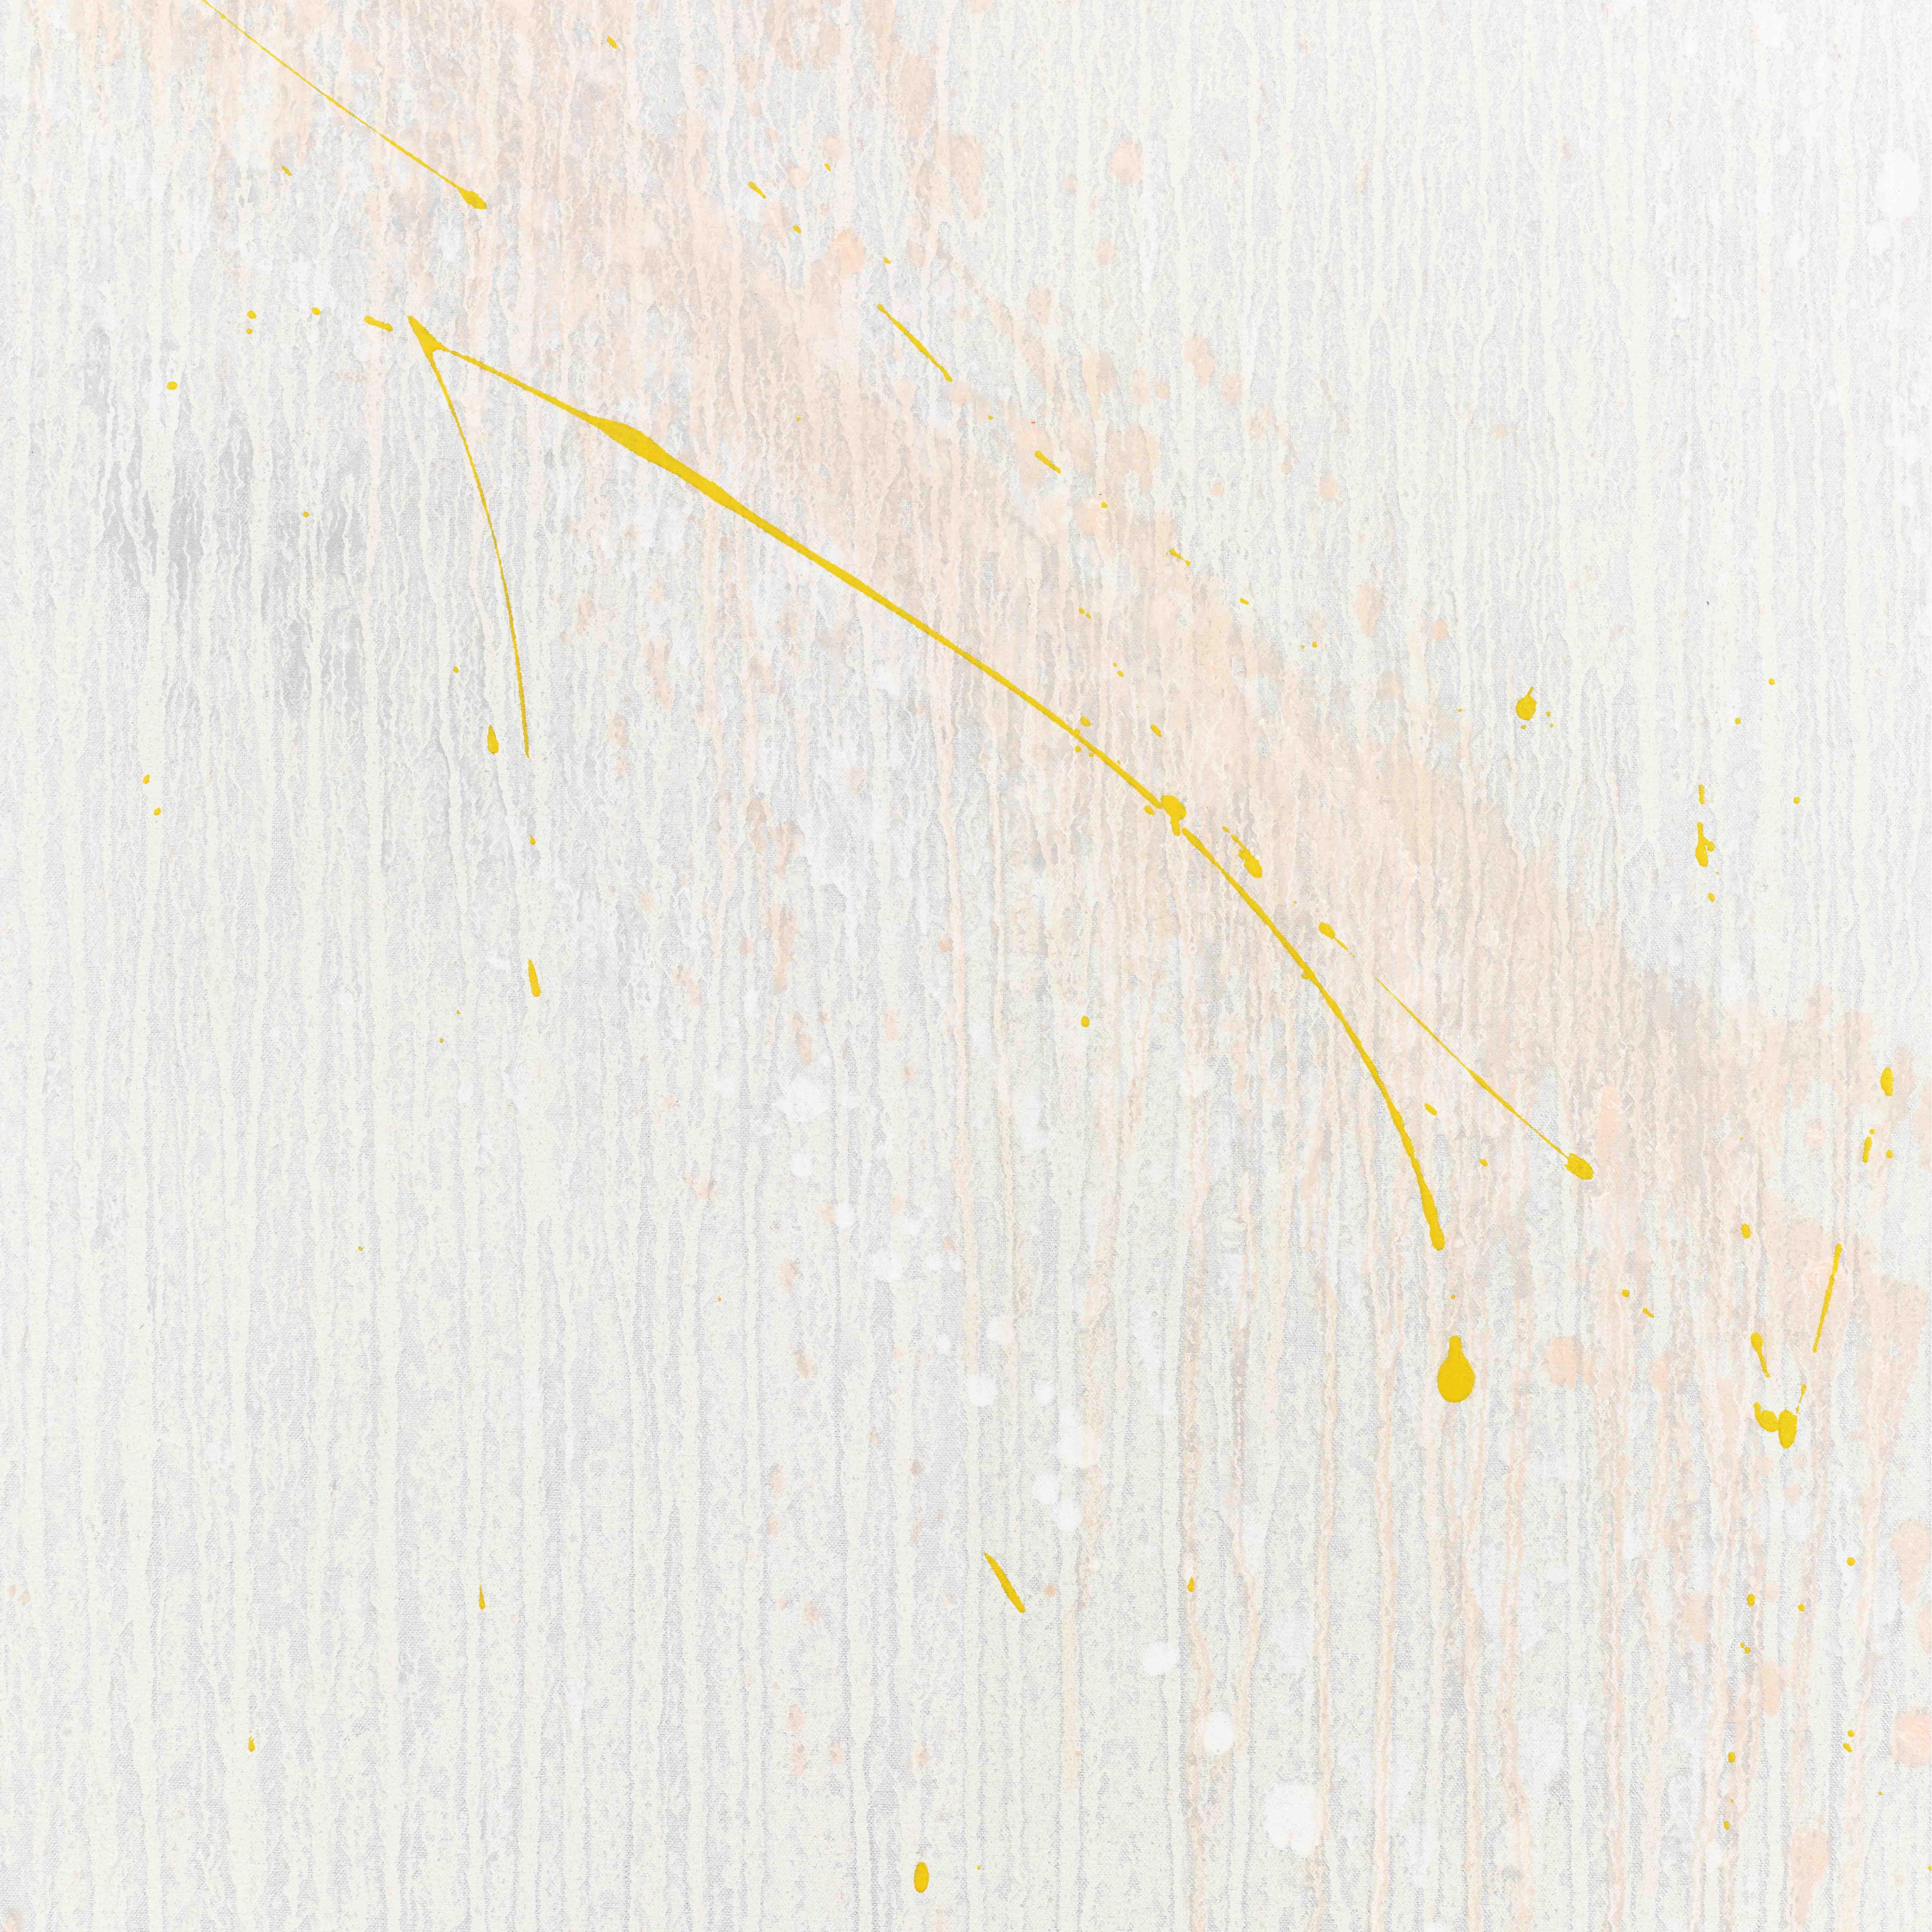 Detail view of Pat Steir's painting Distant Mist